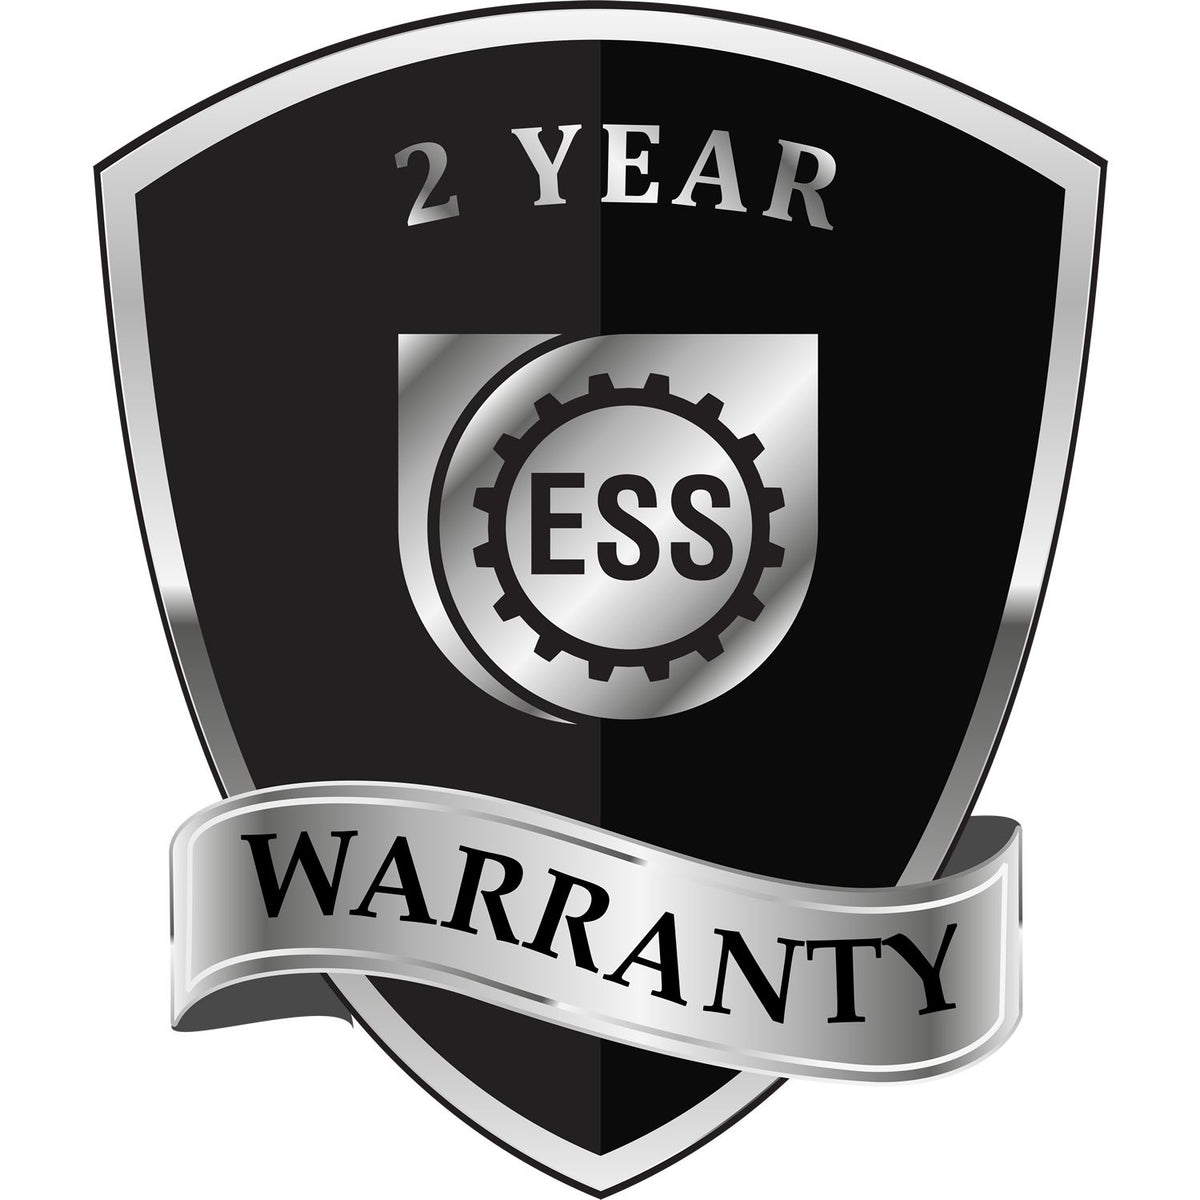 A badge or emblem showing a warranty icon for the Handheld Massachusetts Land Surveyor Seal